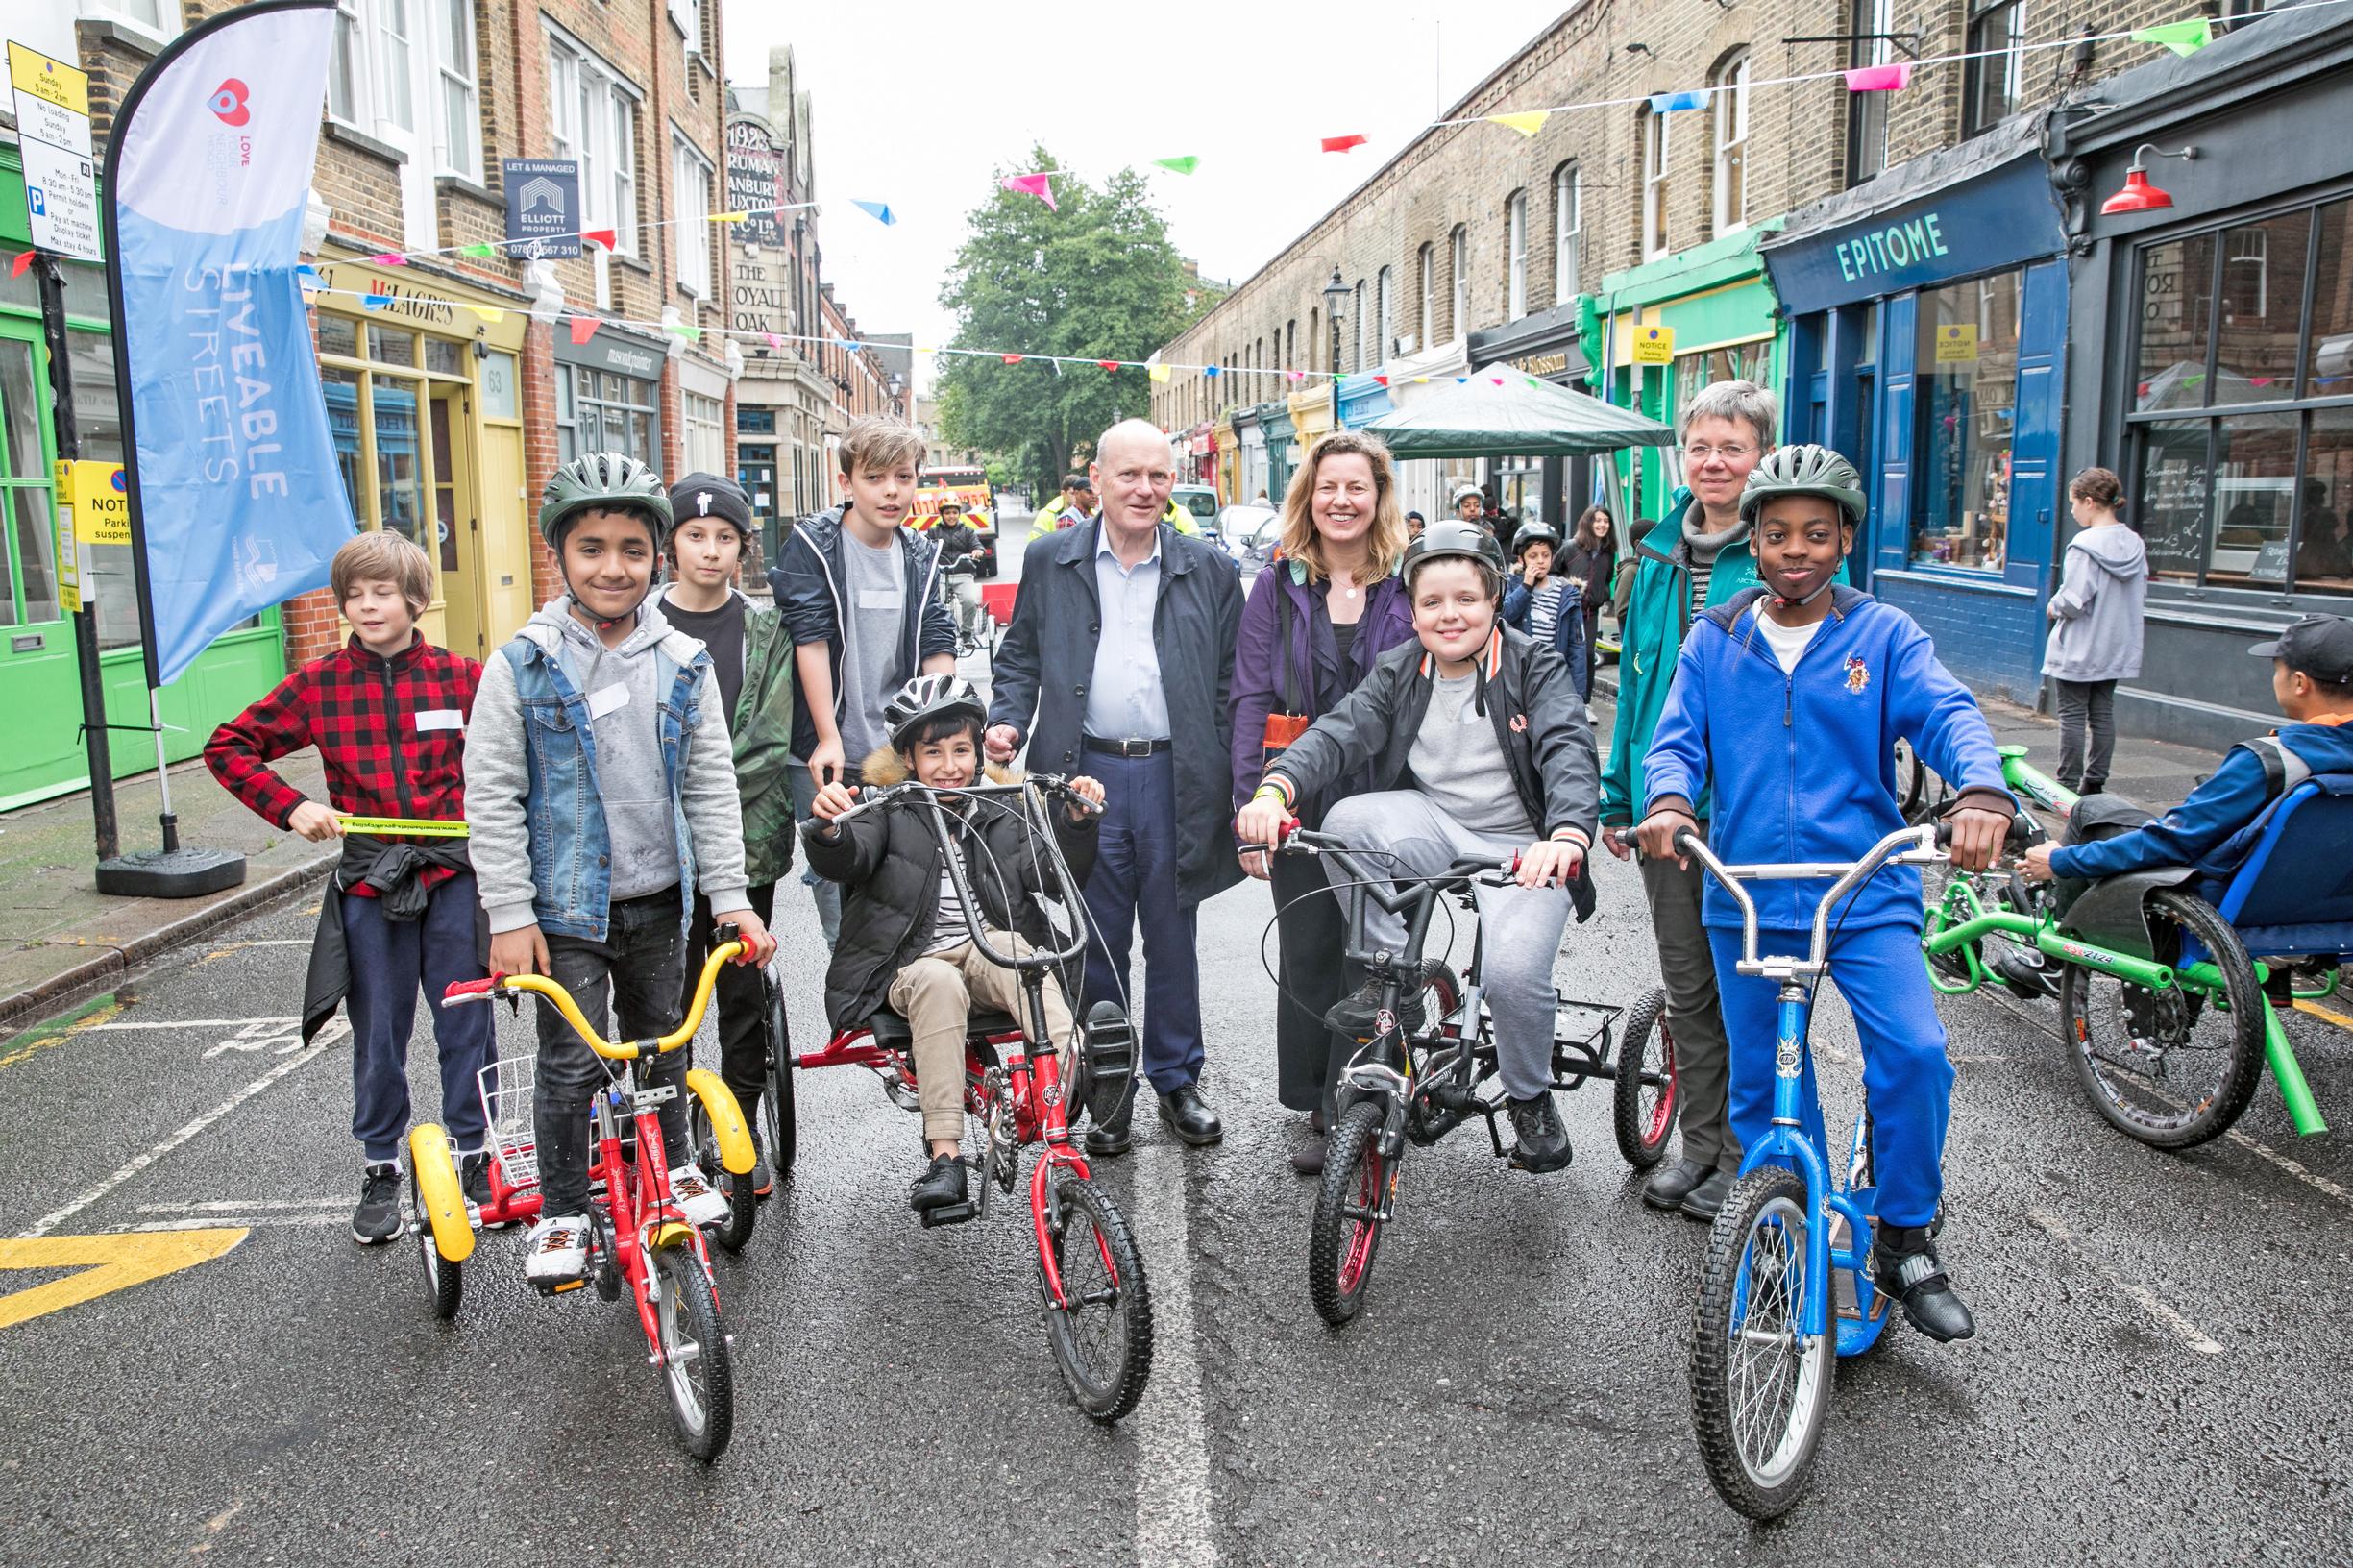 Tower Hamlets mayor John Biggs at the launch of its liveable streets programme